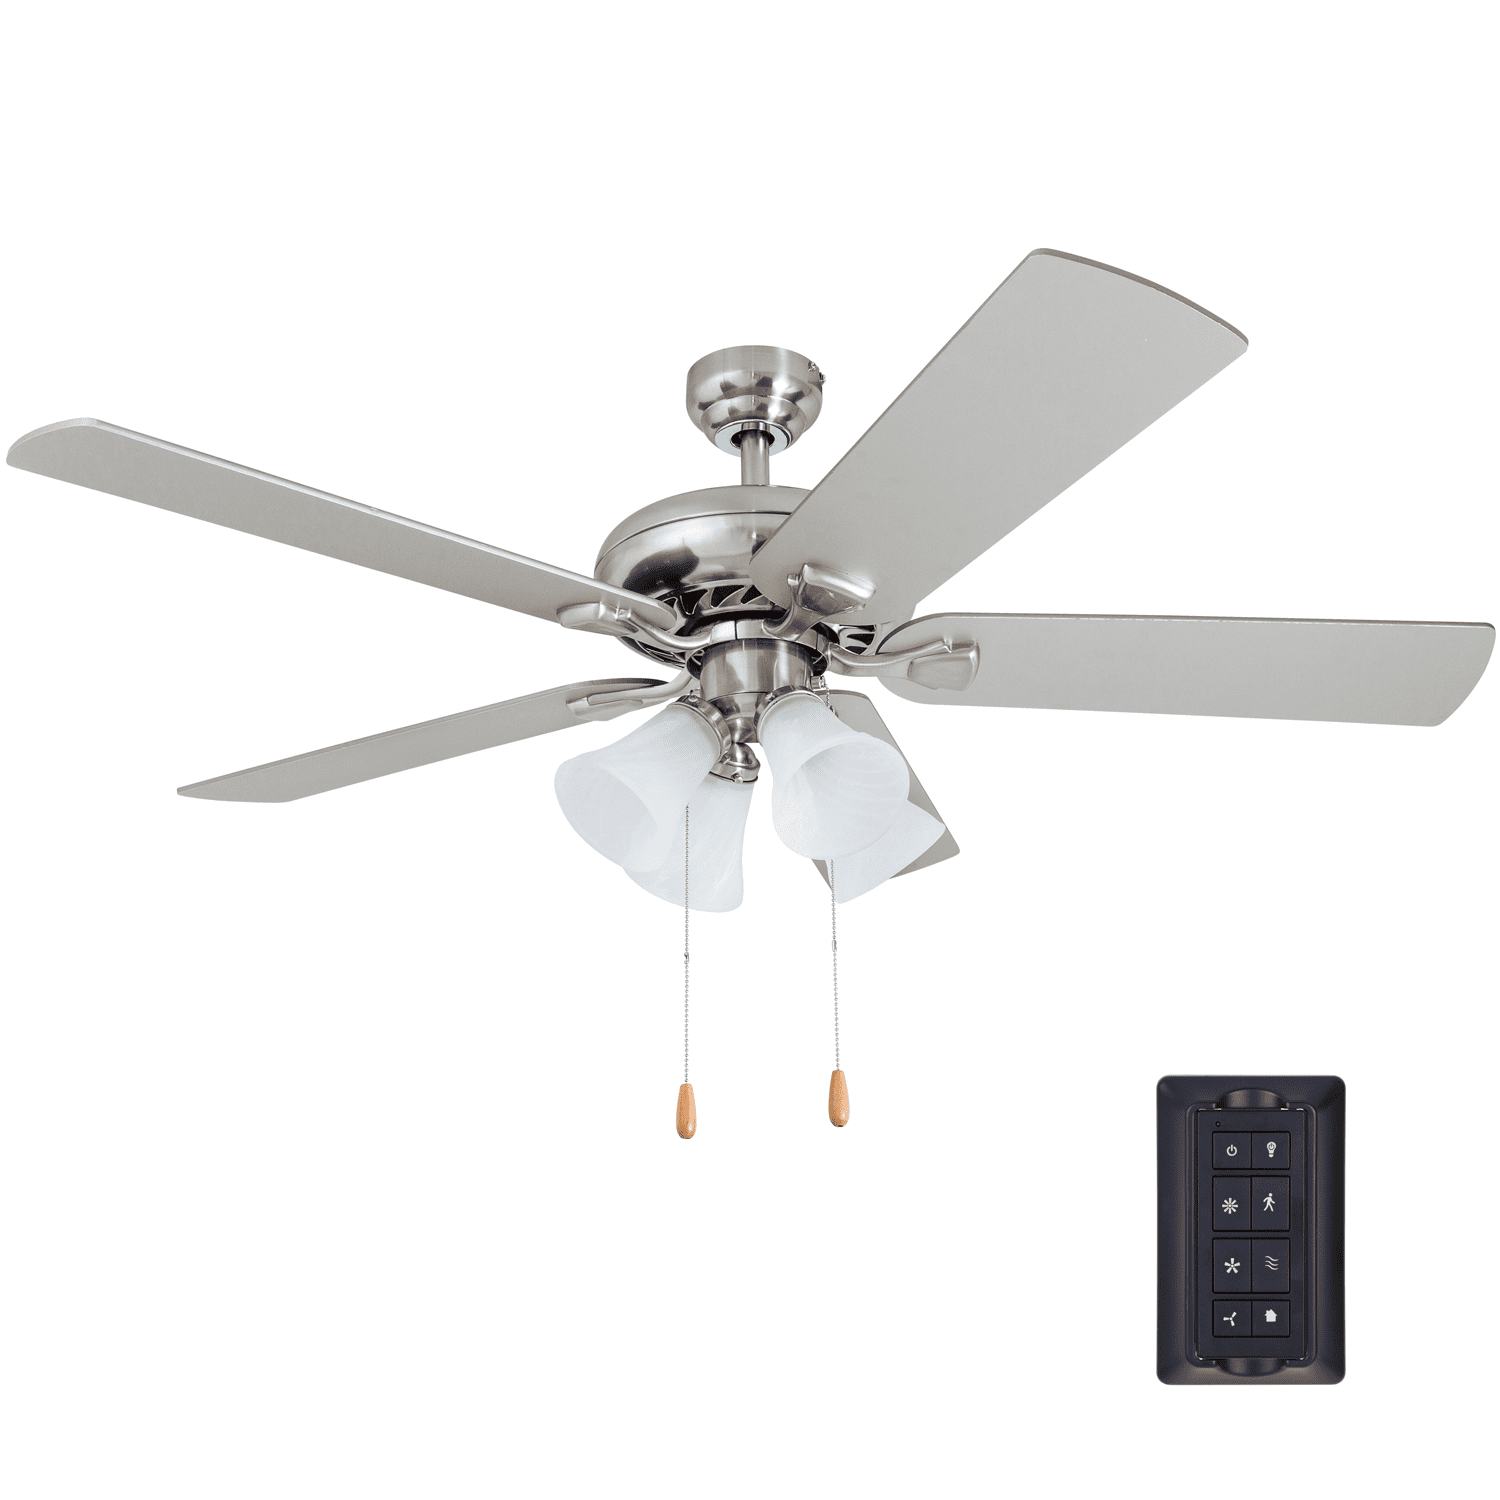 52" Black Pine Remote Controlled Ceiling Fan LED Light Frosted Fixture 3 Speed